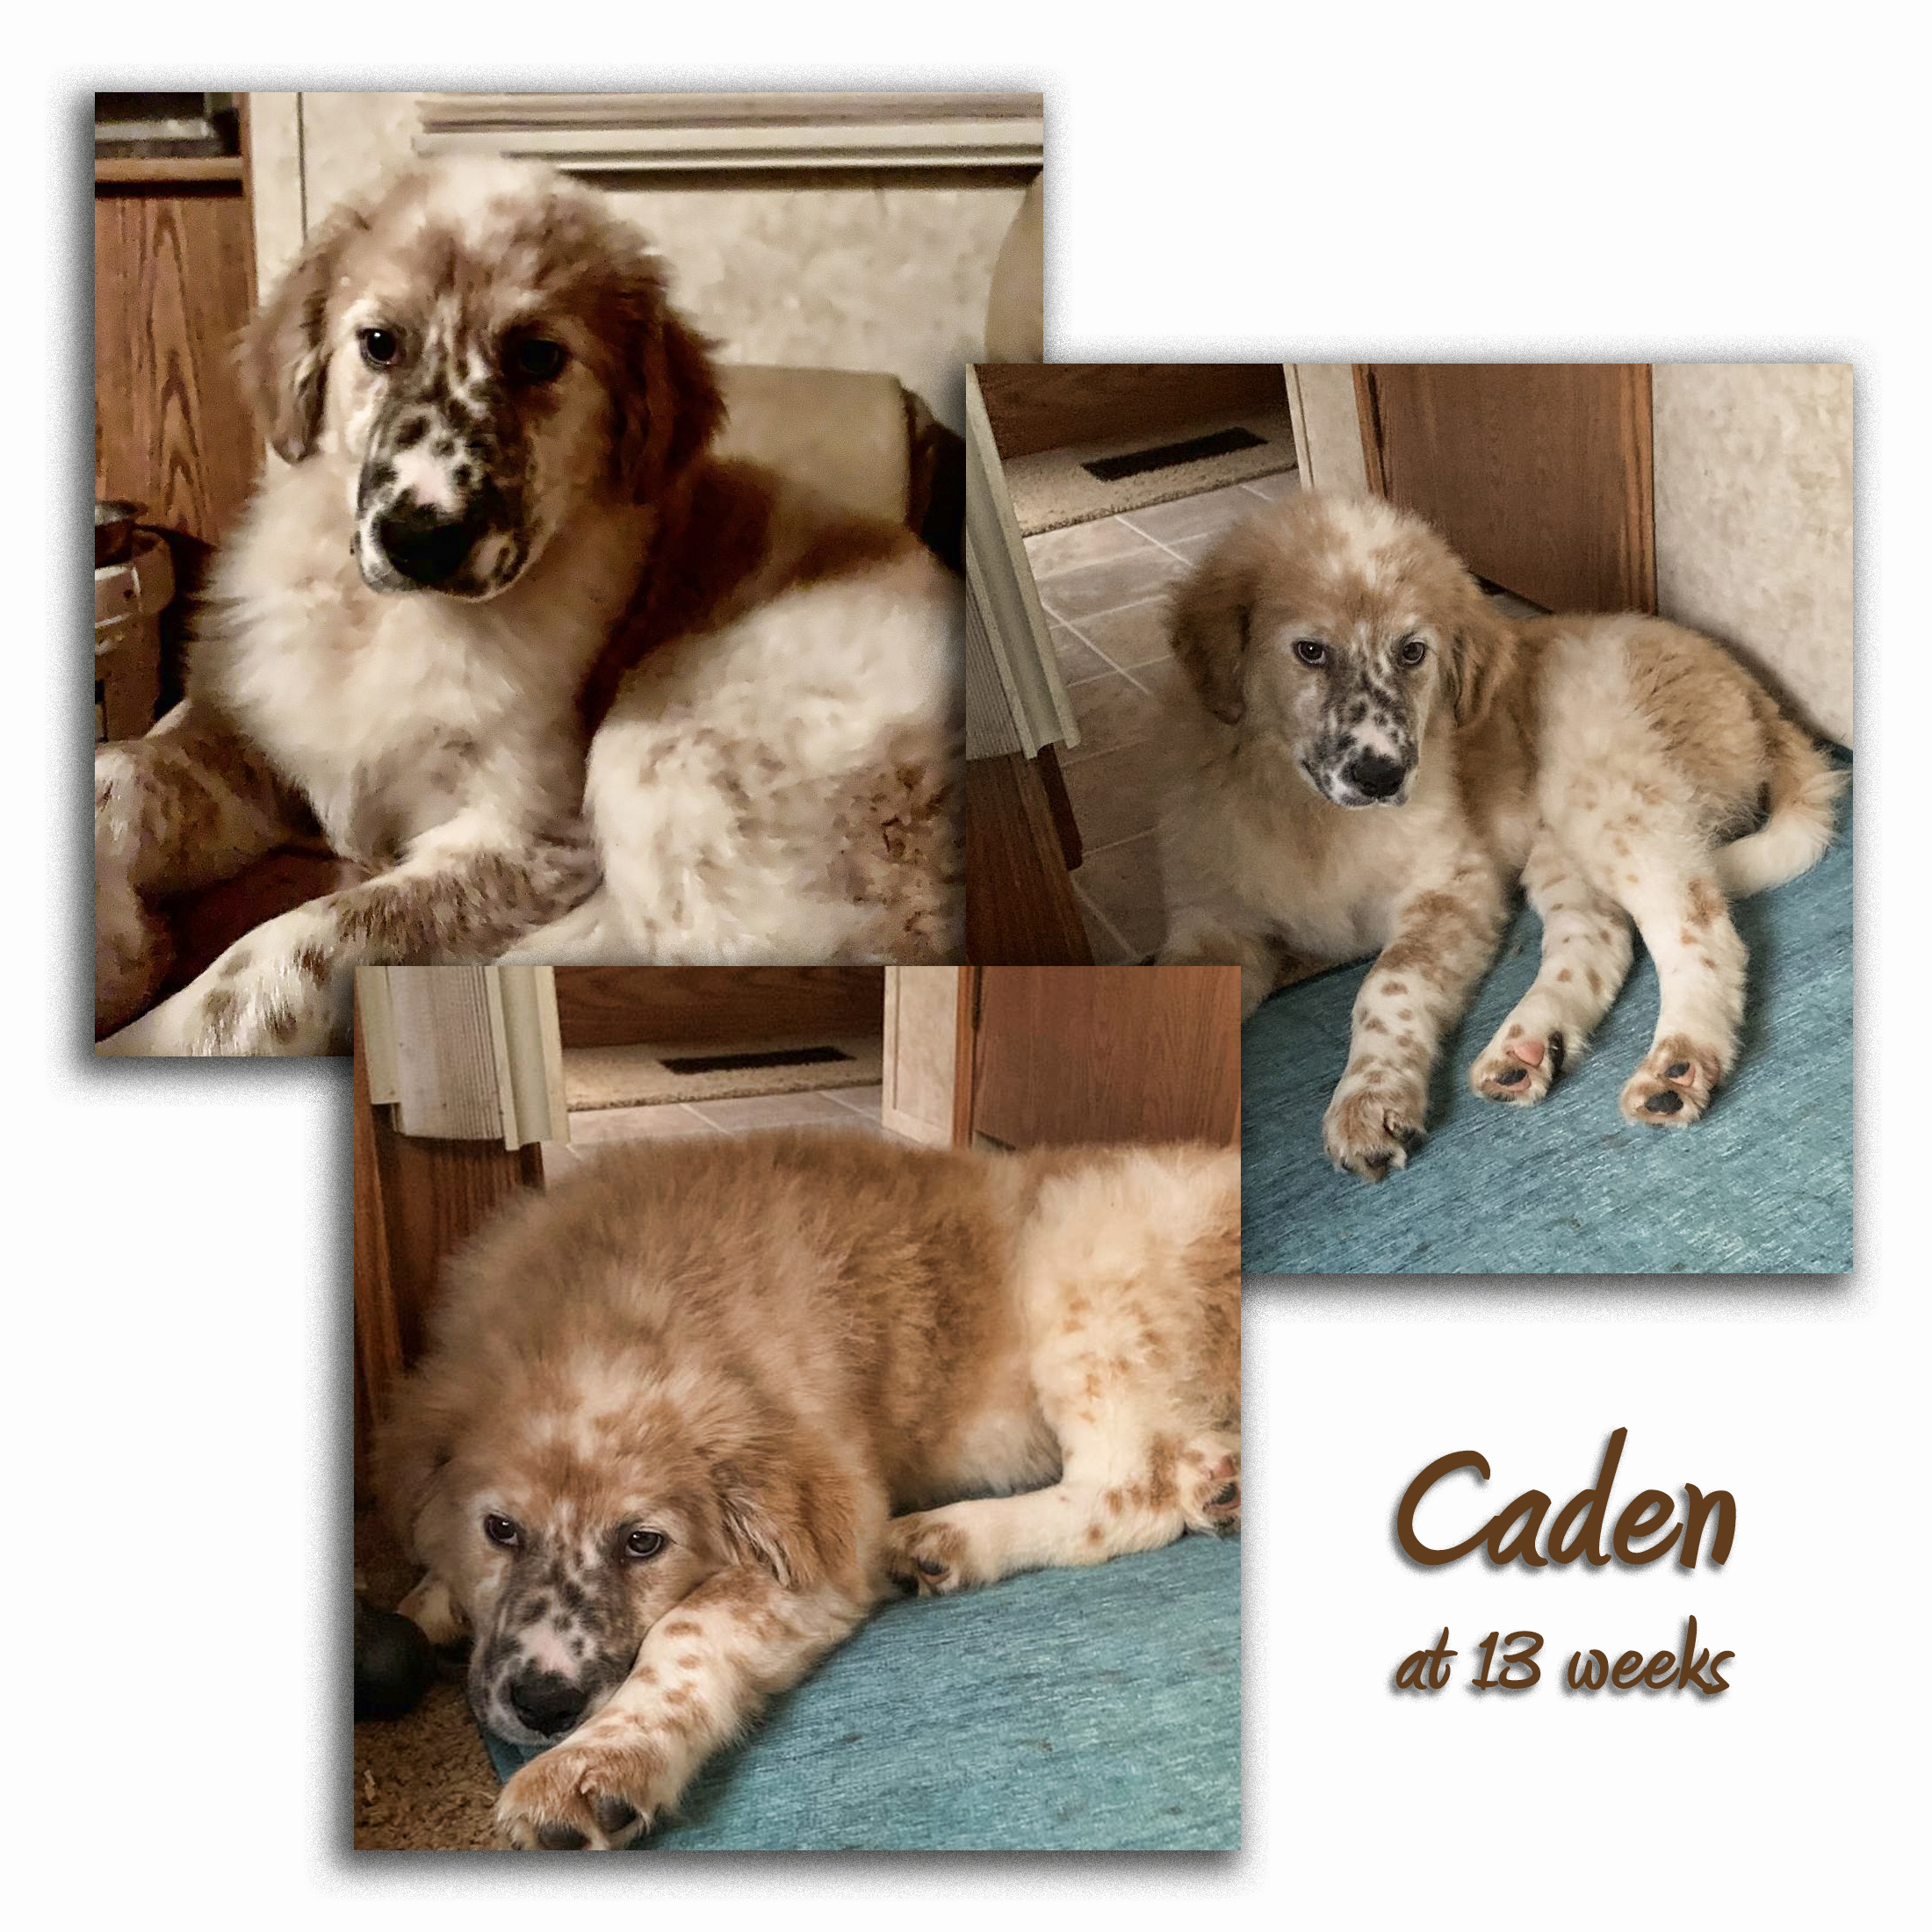 Click on the image to find out more about Caden